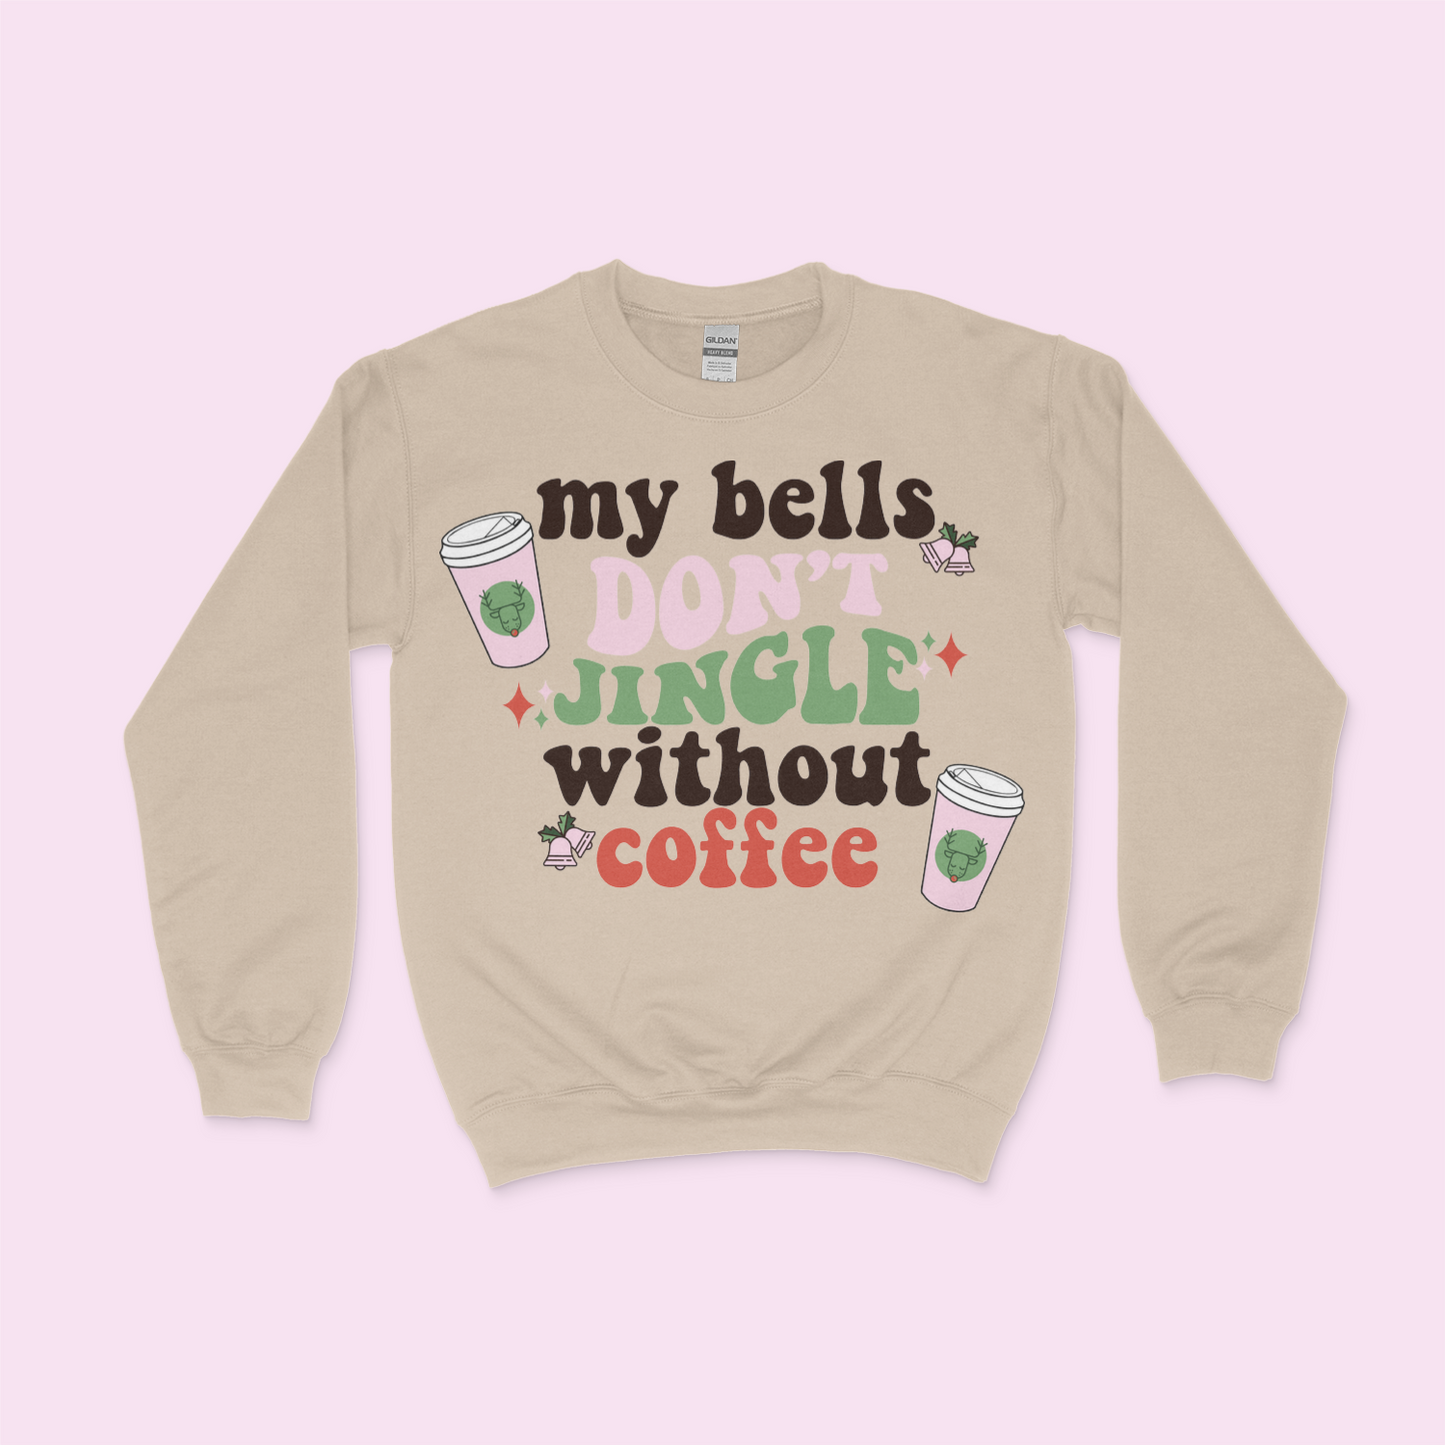 "My bells don't jingle without coffee" print